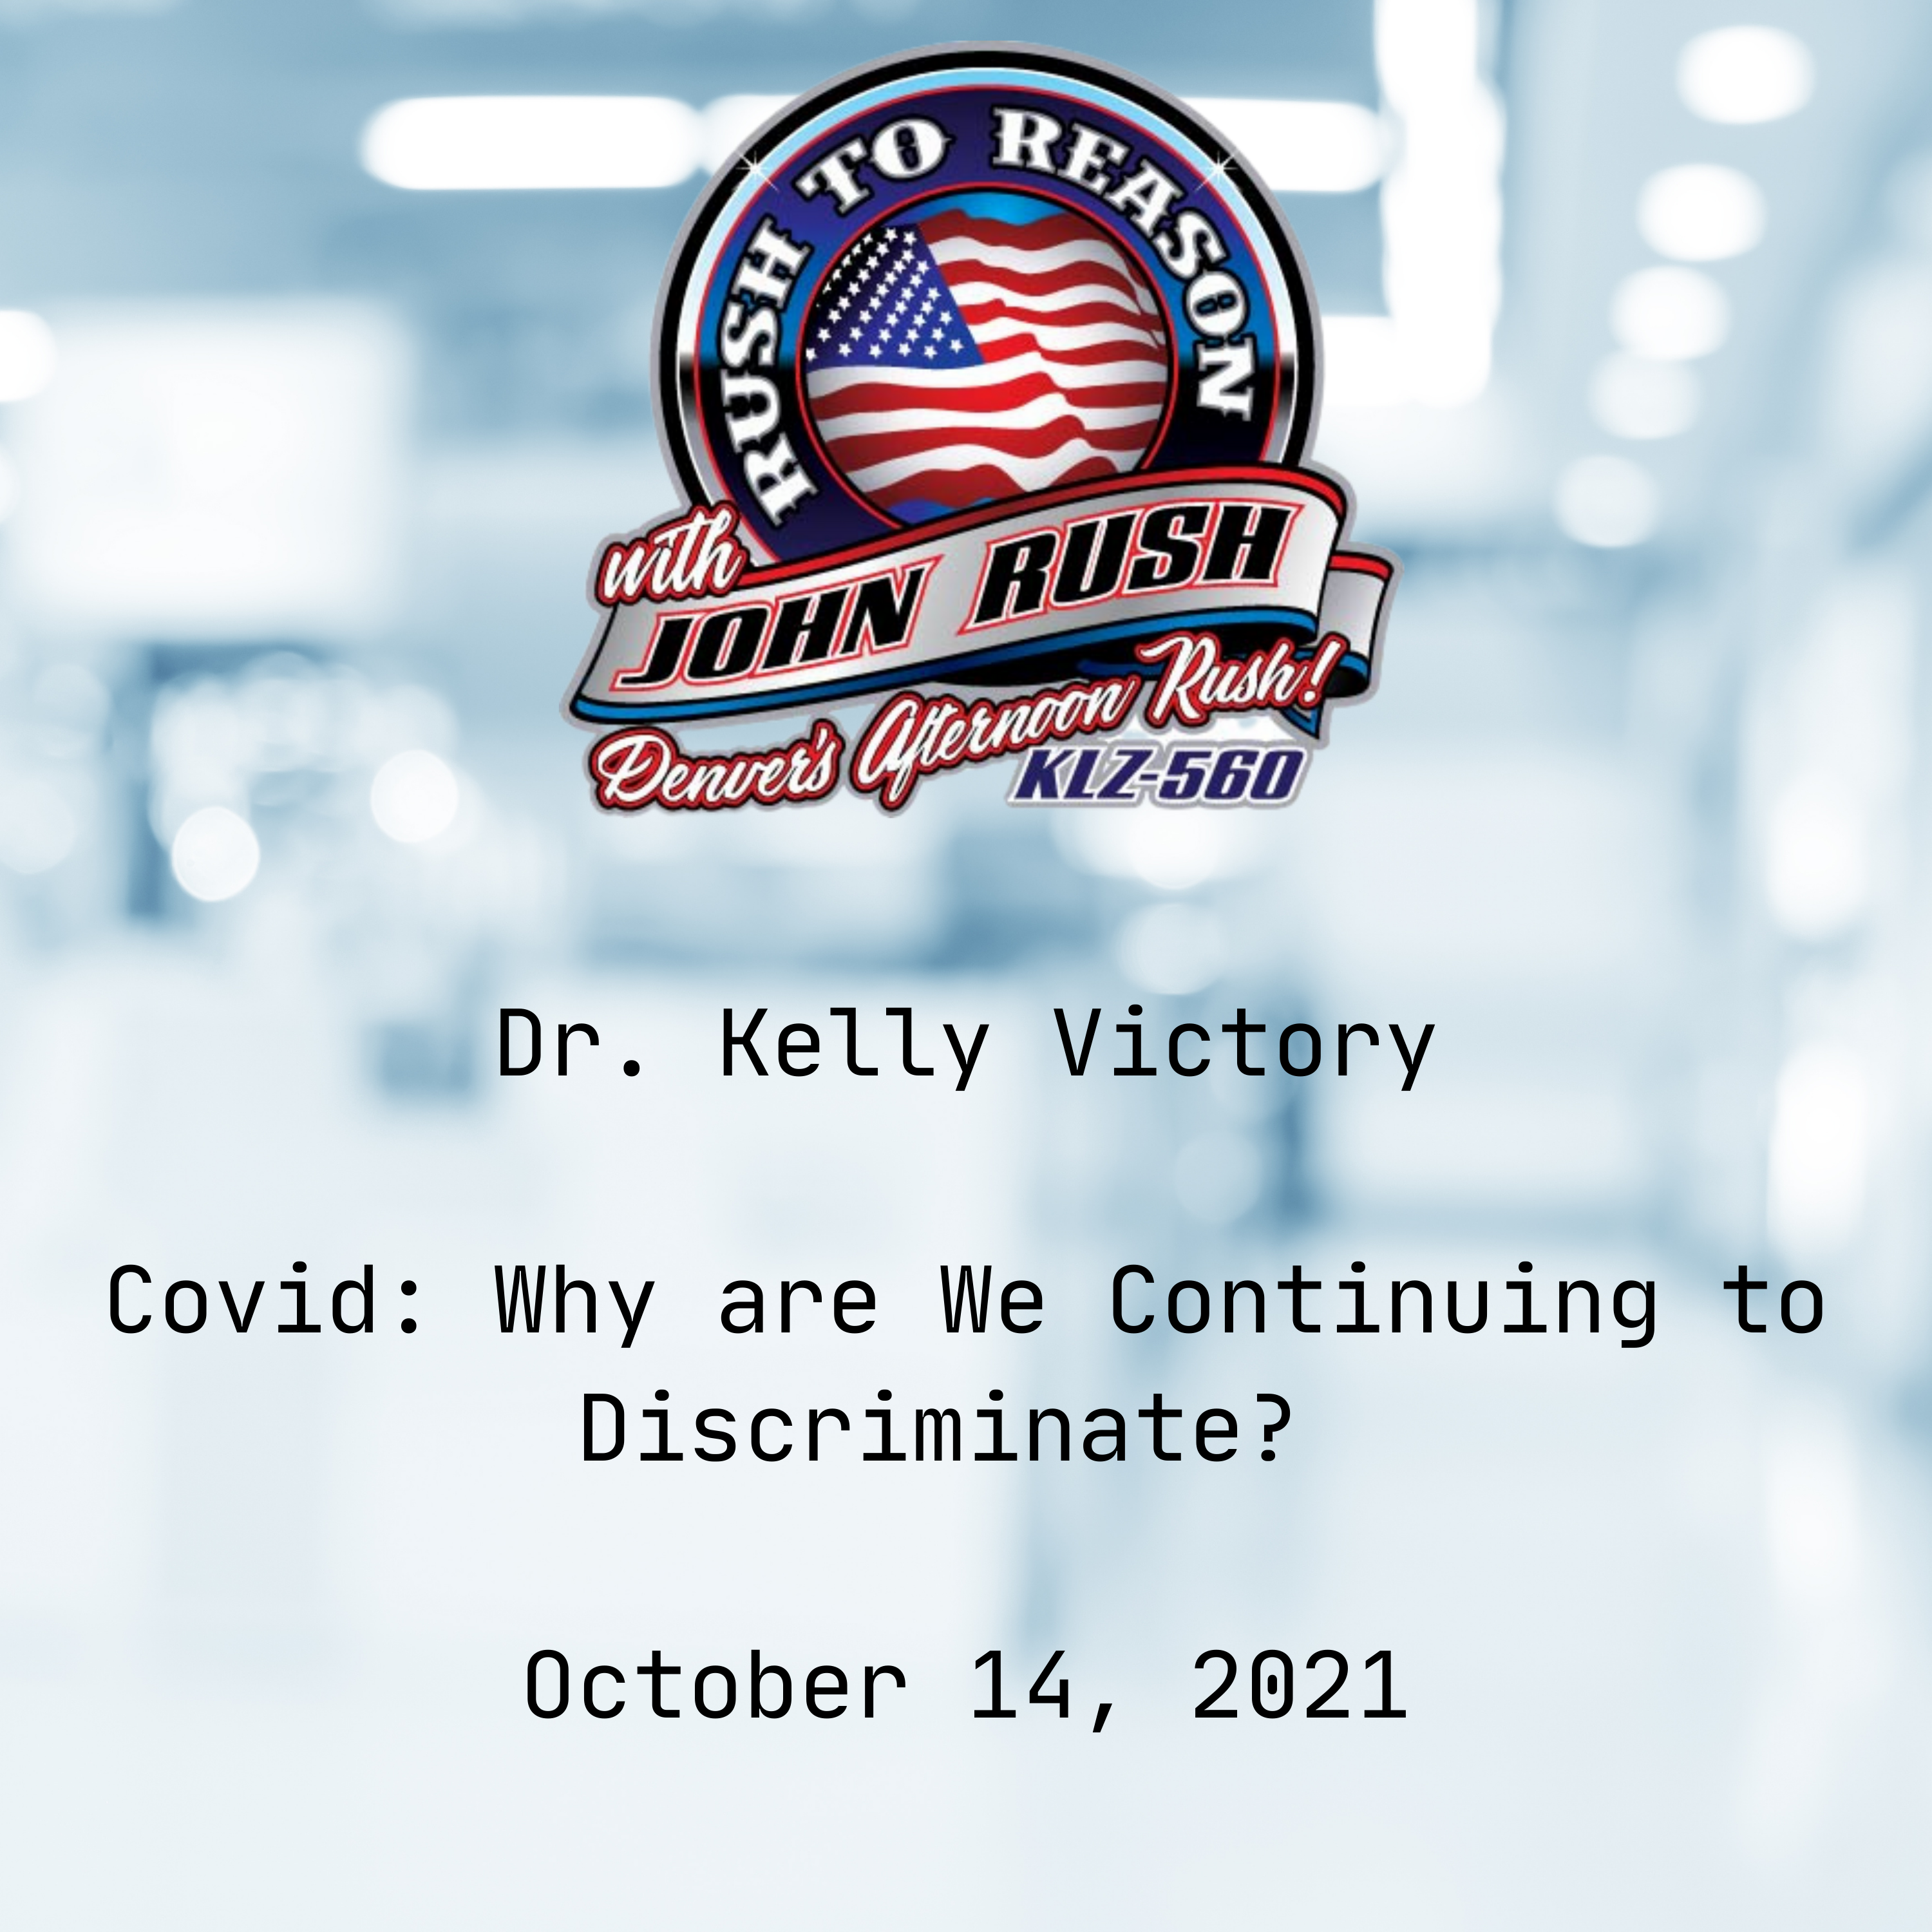 Covid: Why are We Continuing to Discriminate?